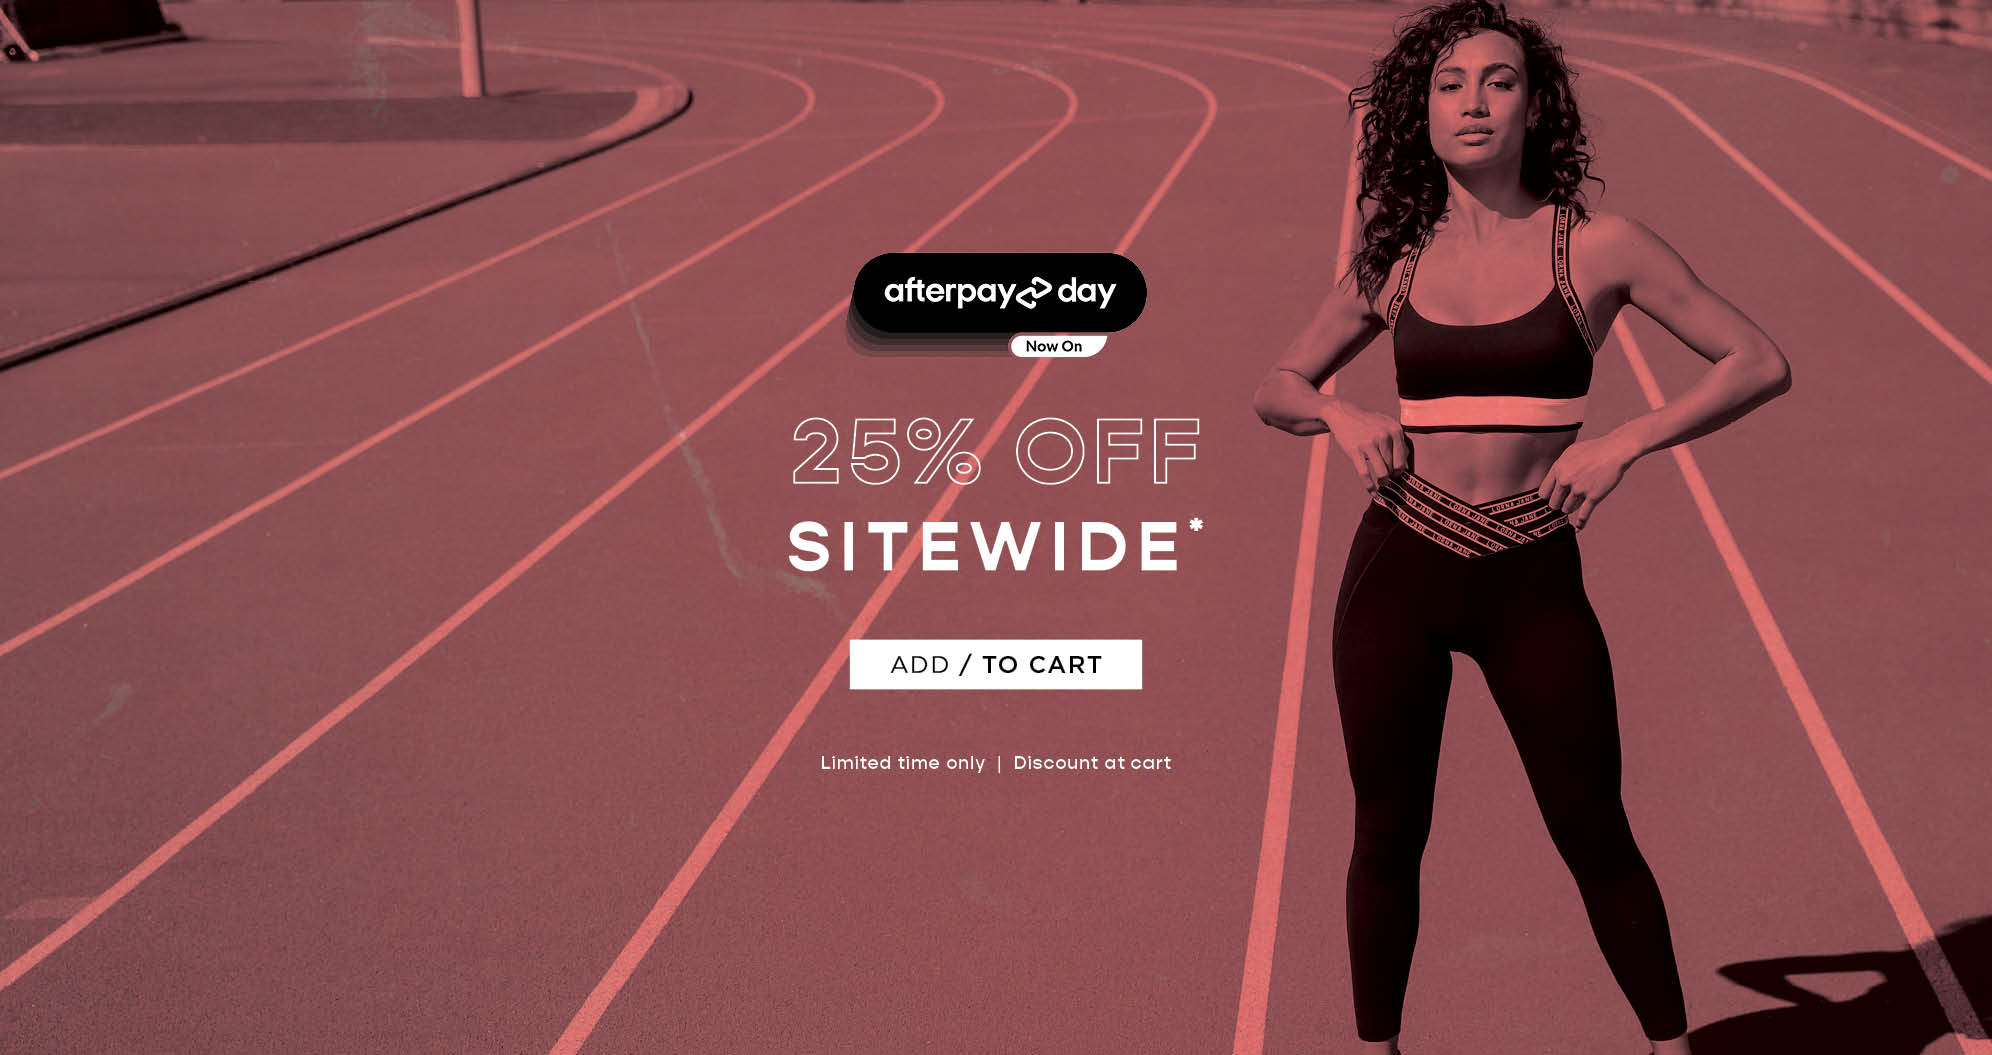 Afterpay day - 25% off sitewide